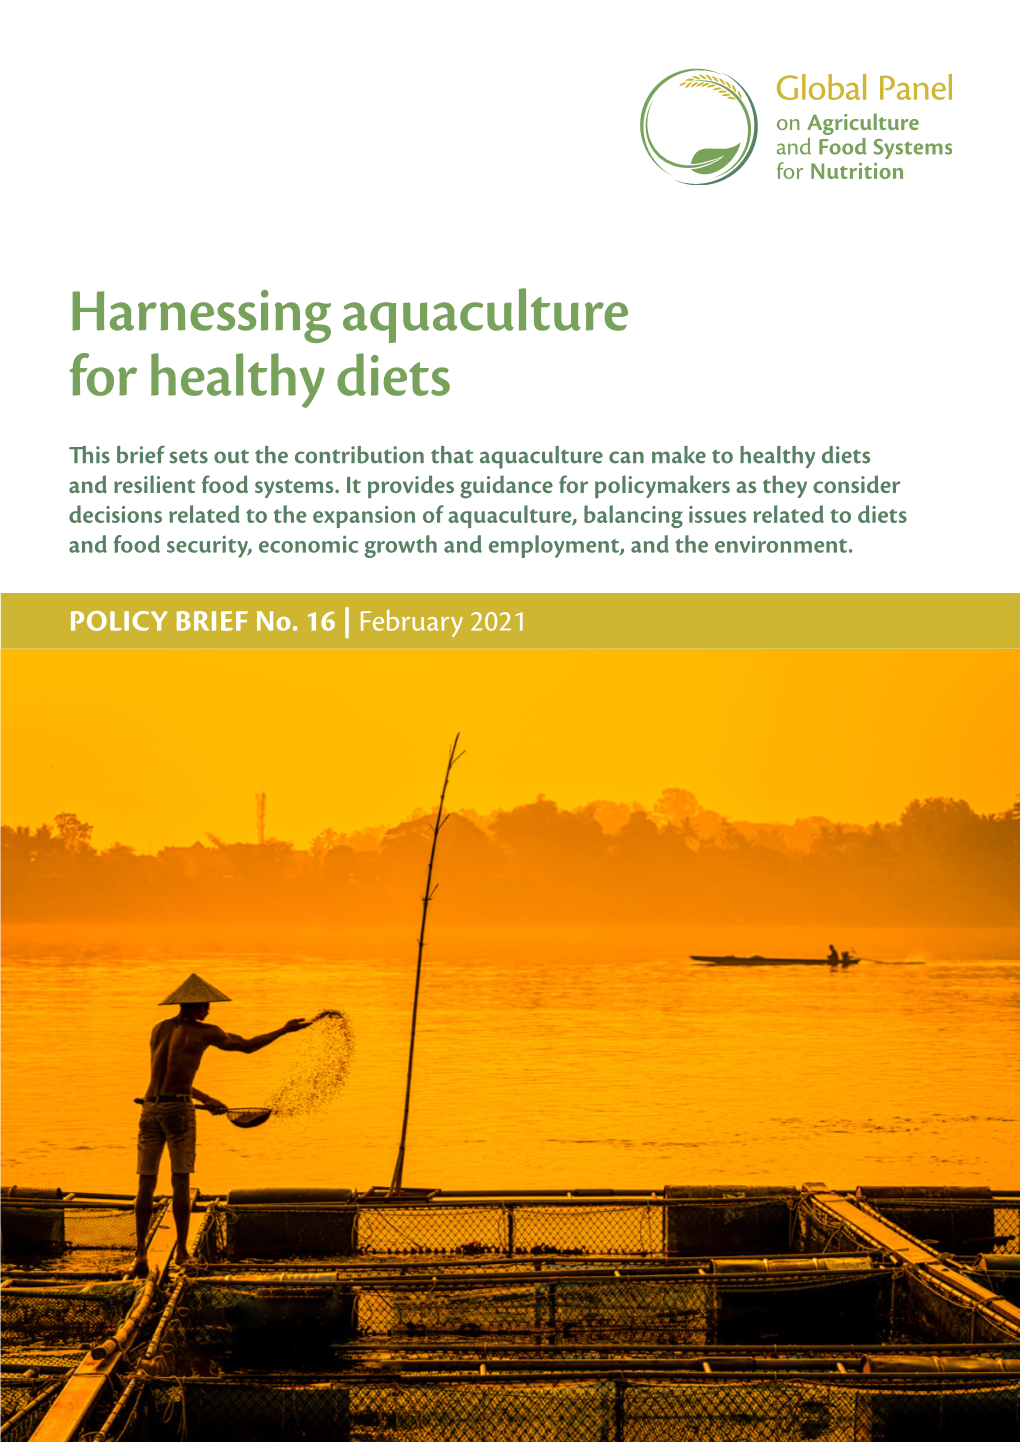 Harnessing Aquaculture for Healthy Diets